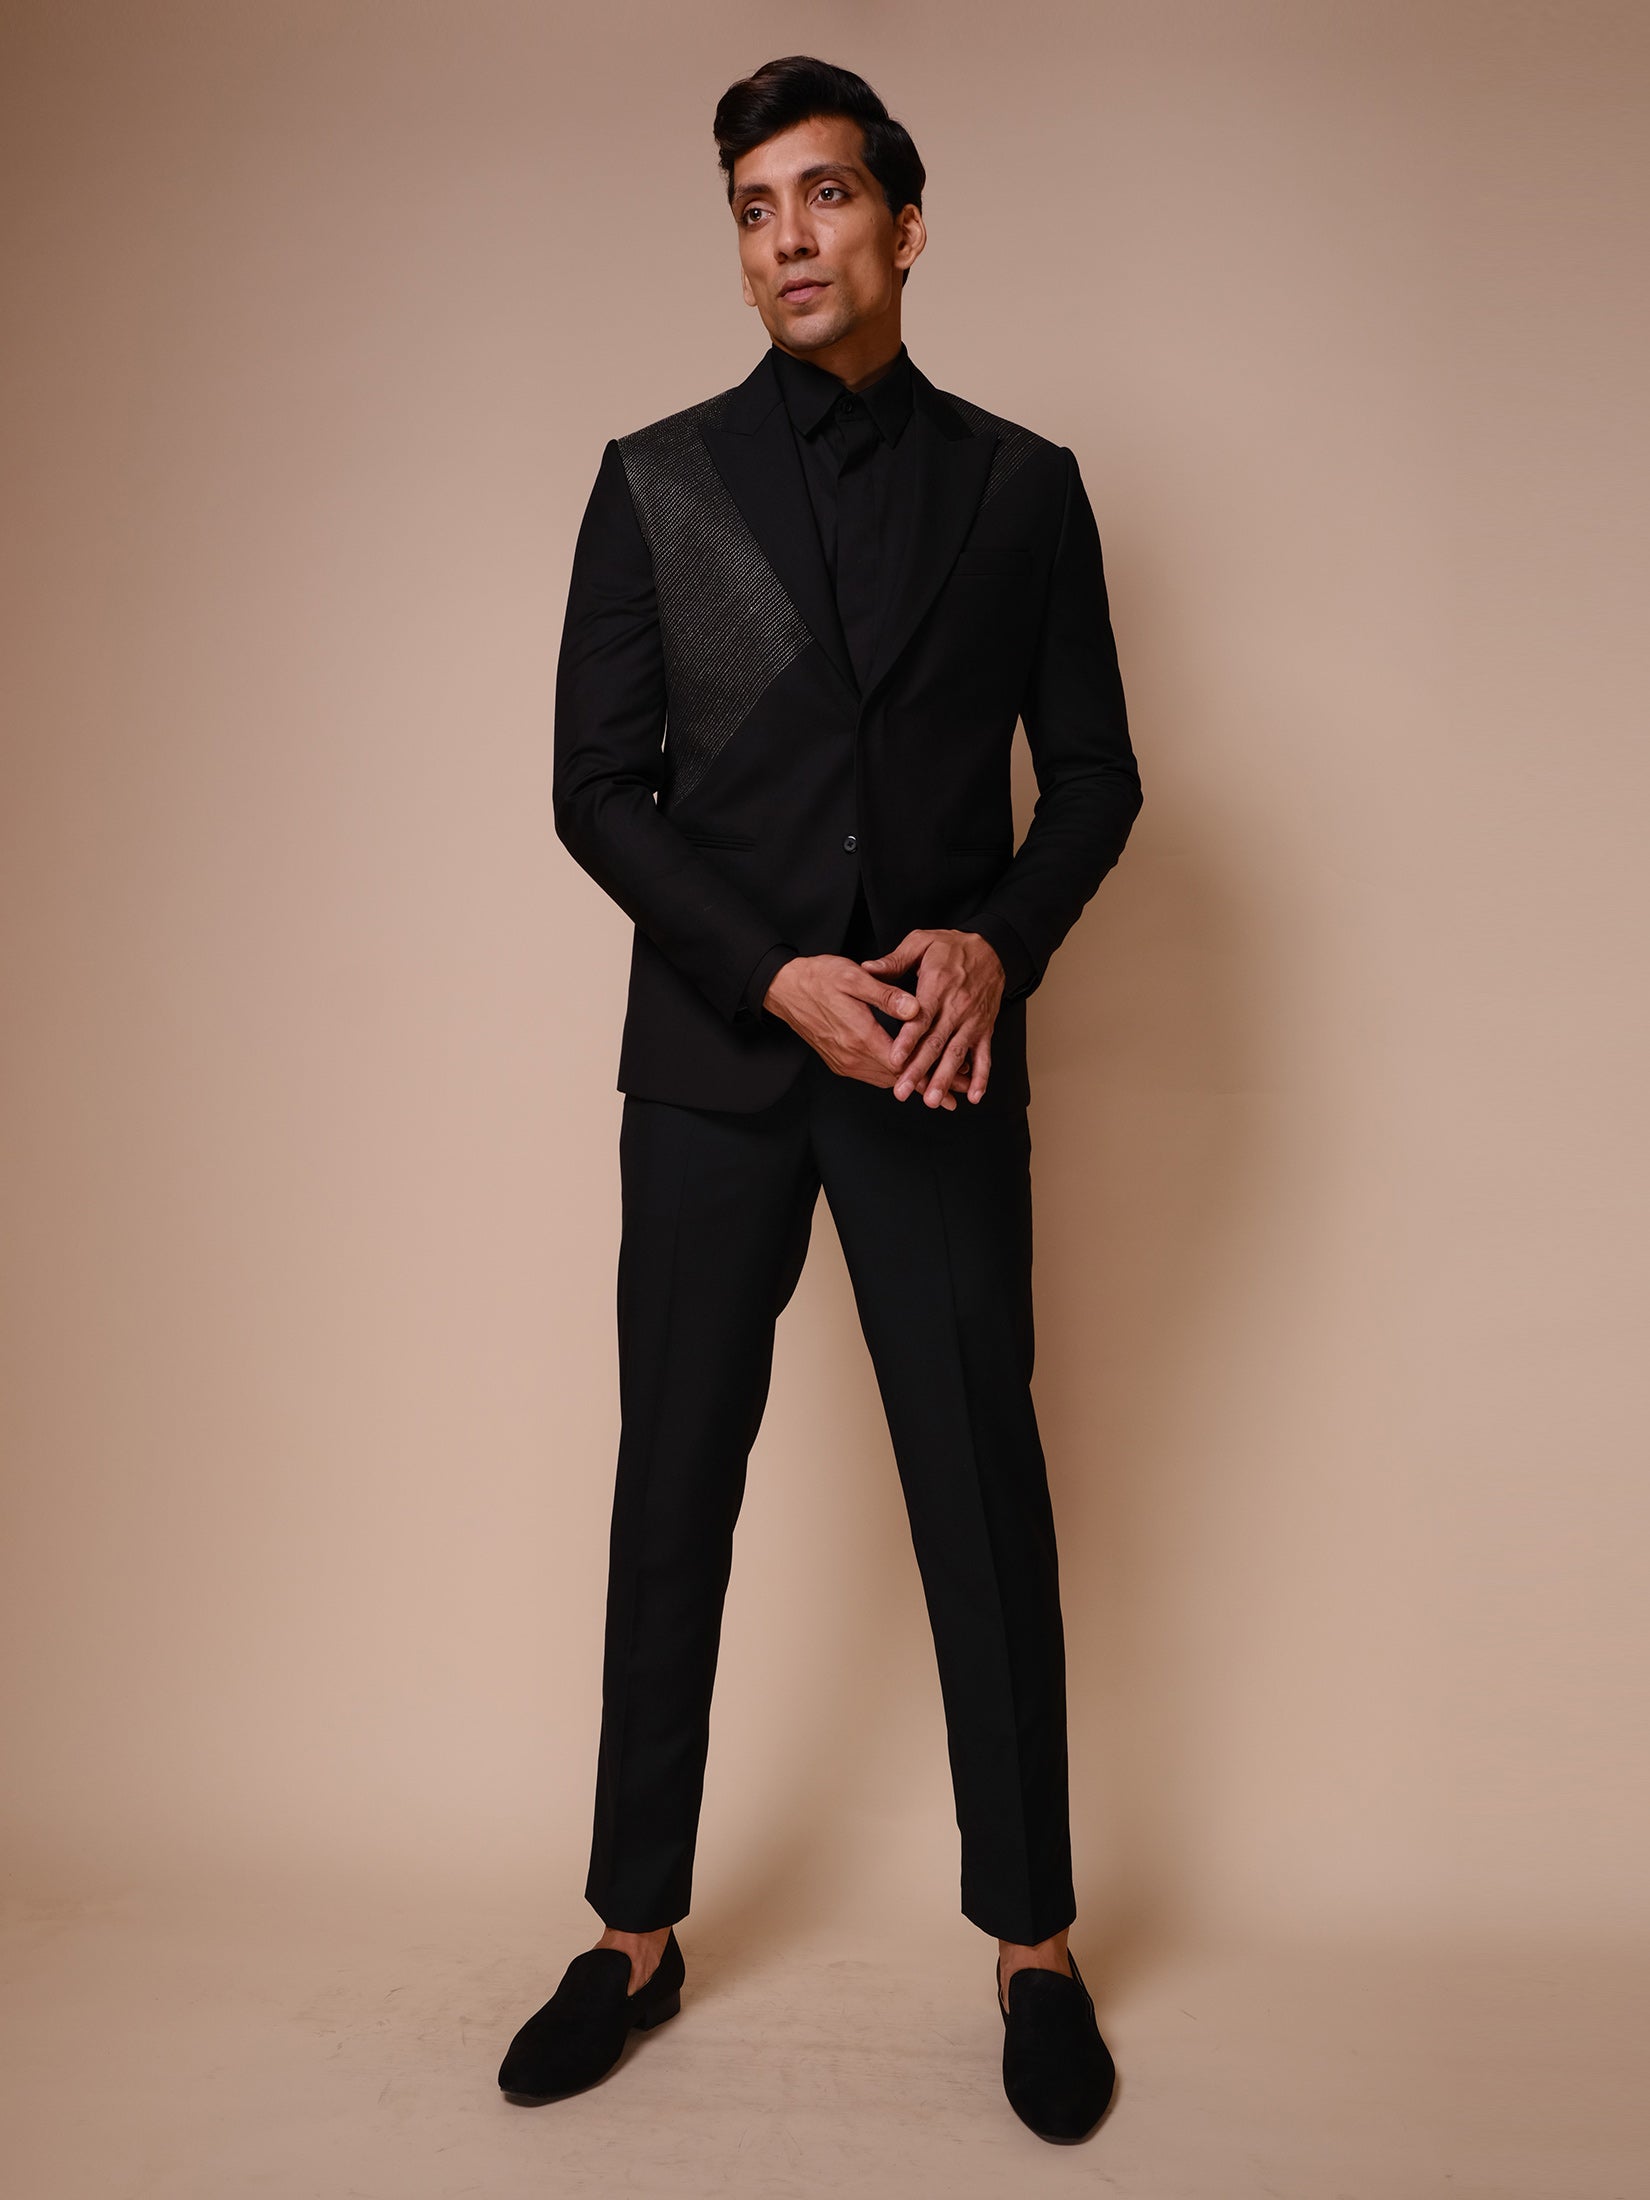 Black Peak Lapel Suit With Diagonal Gold Textured Lines Across Chest Paired With Trousers And Tonal Shirt